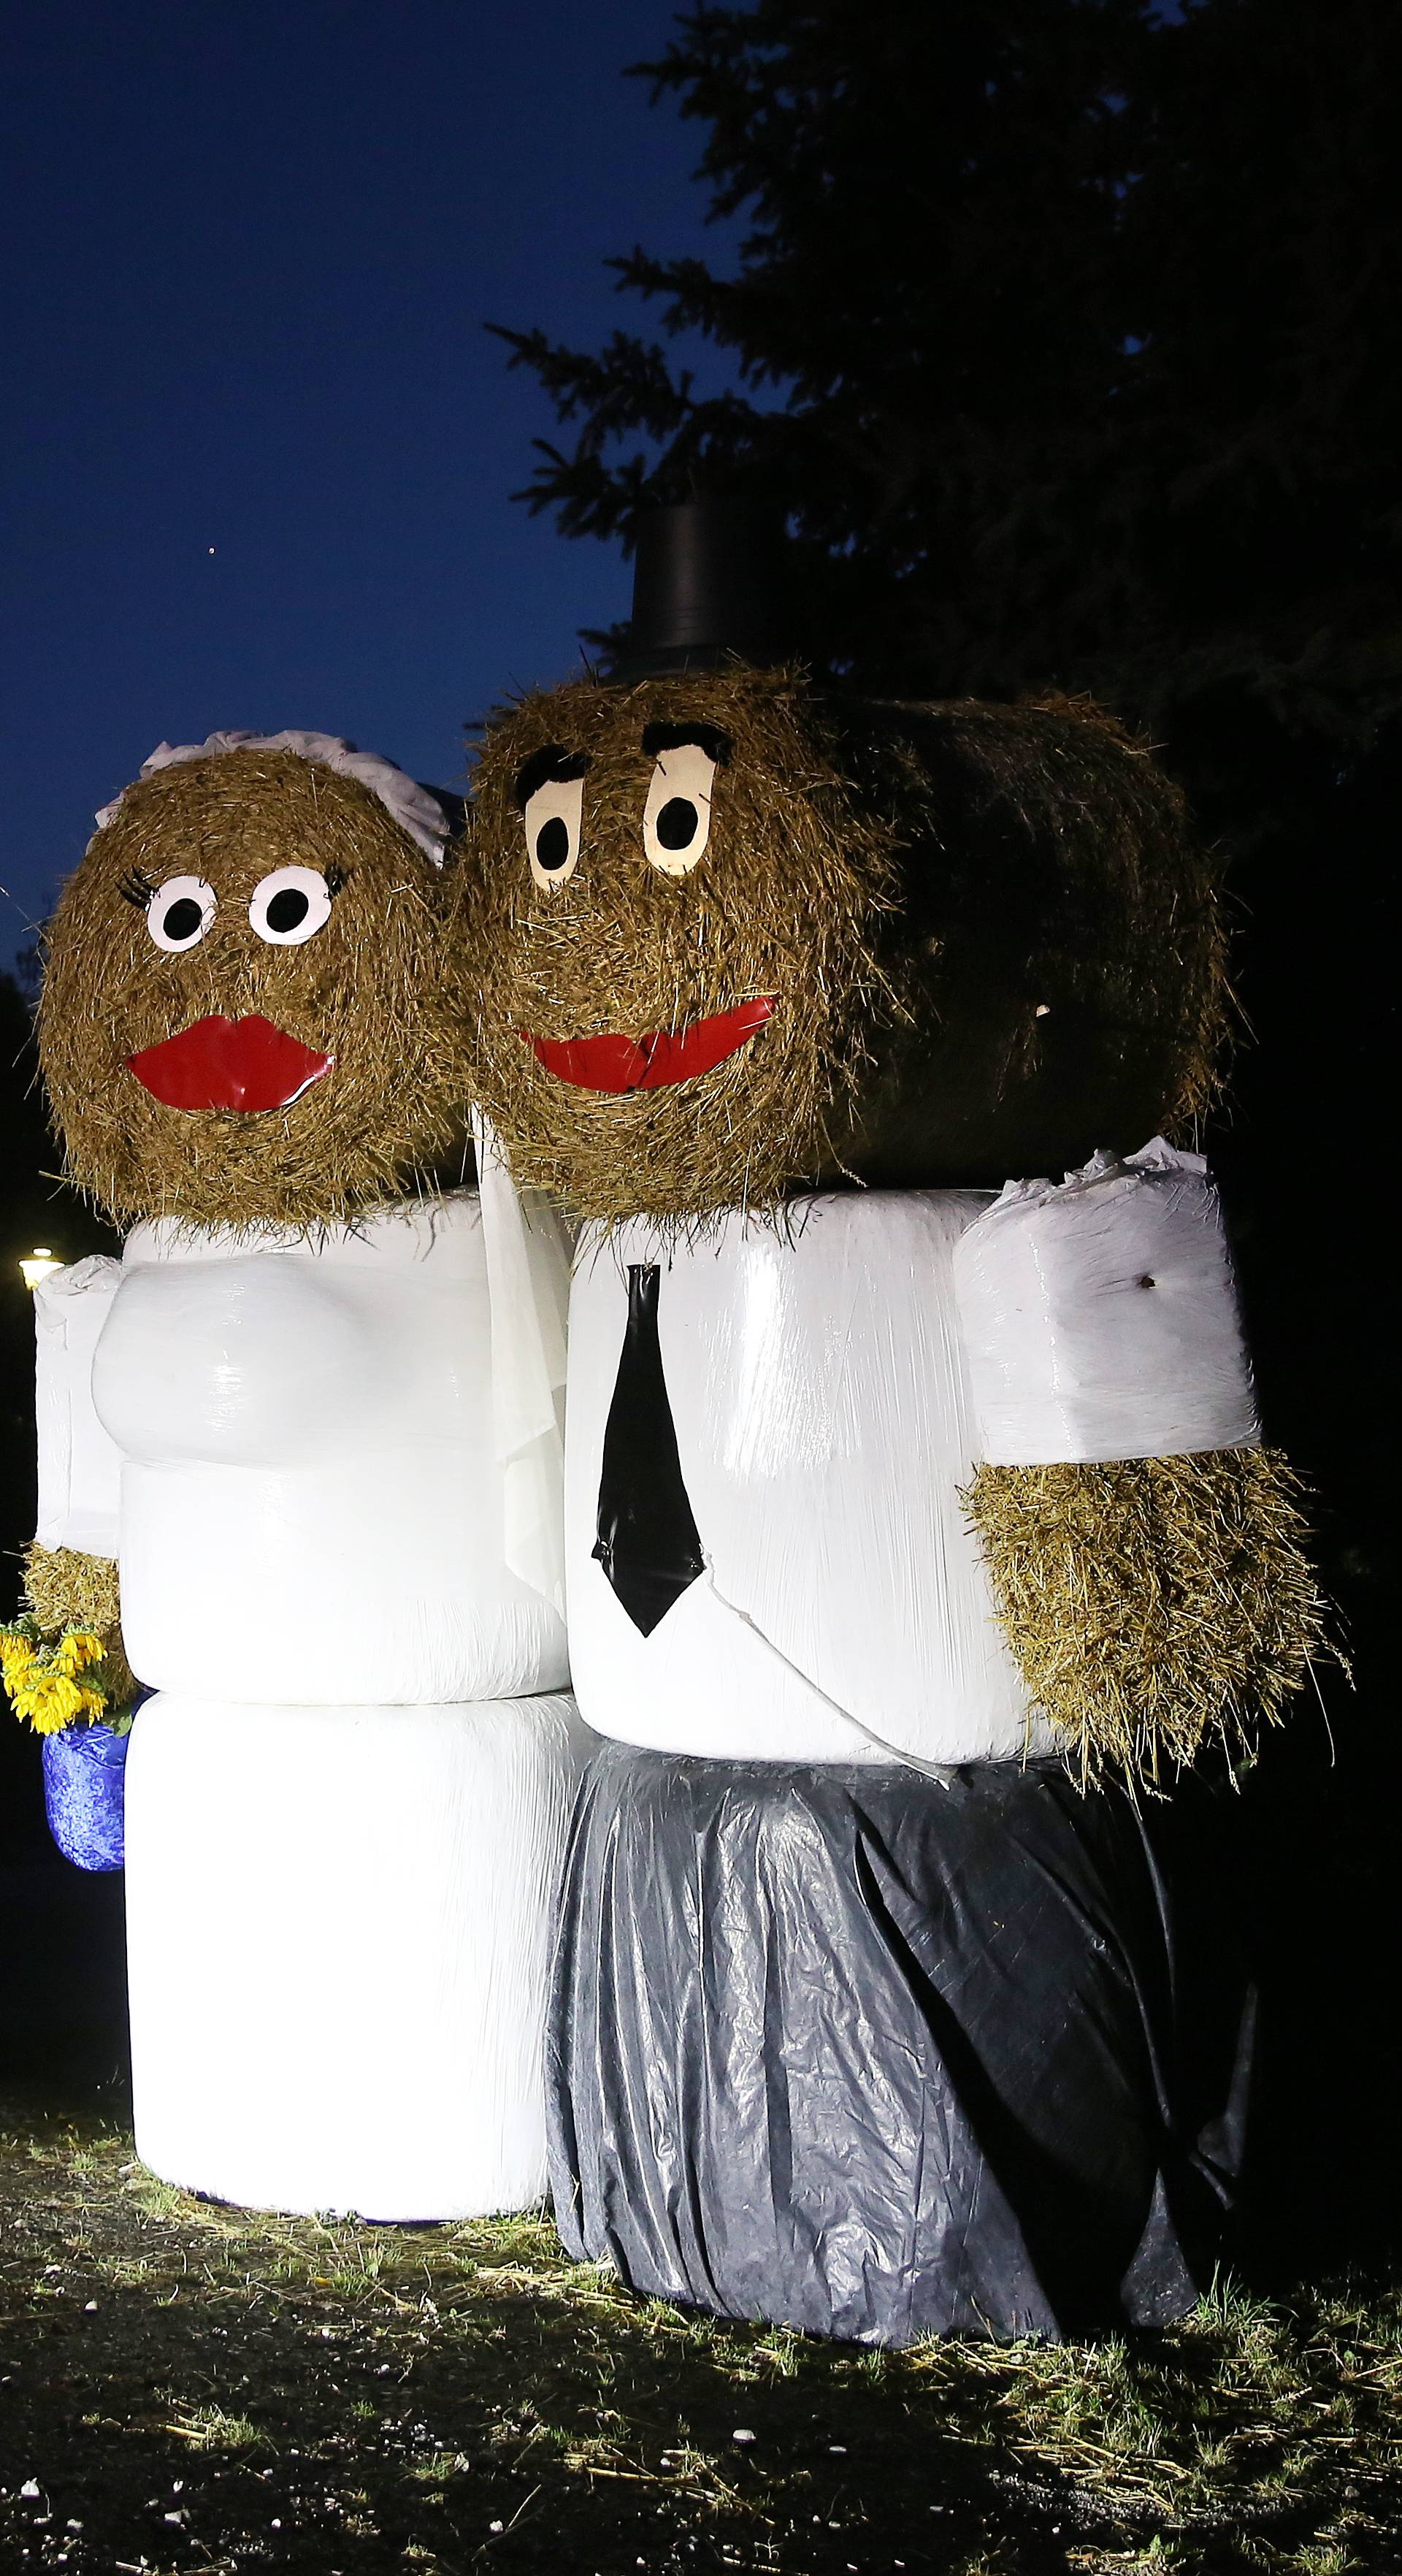 Bride and groom made of straw